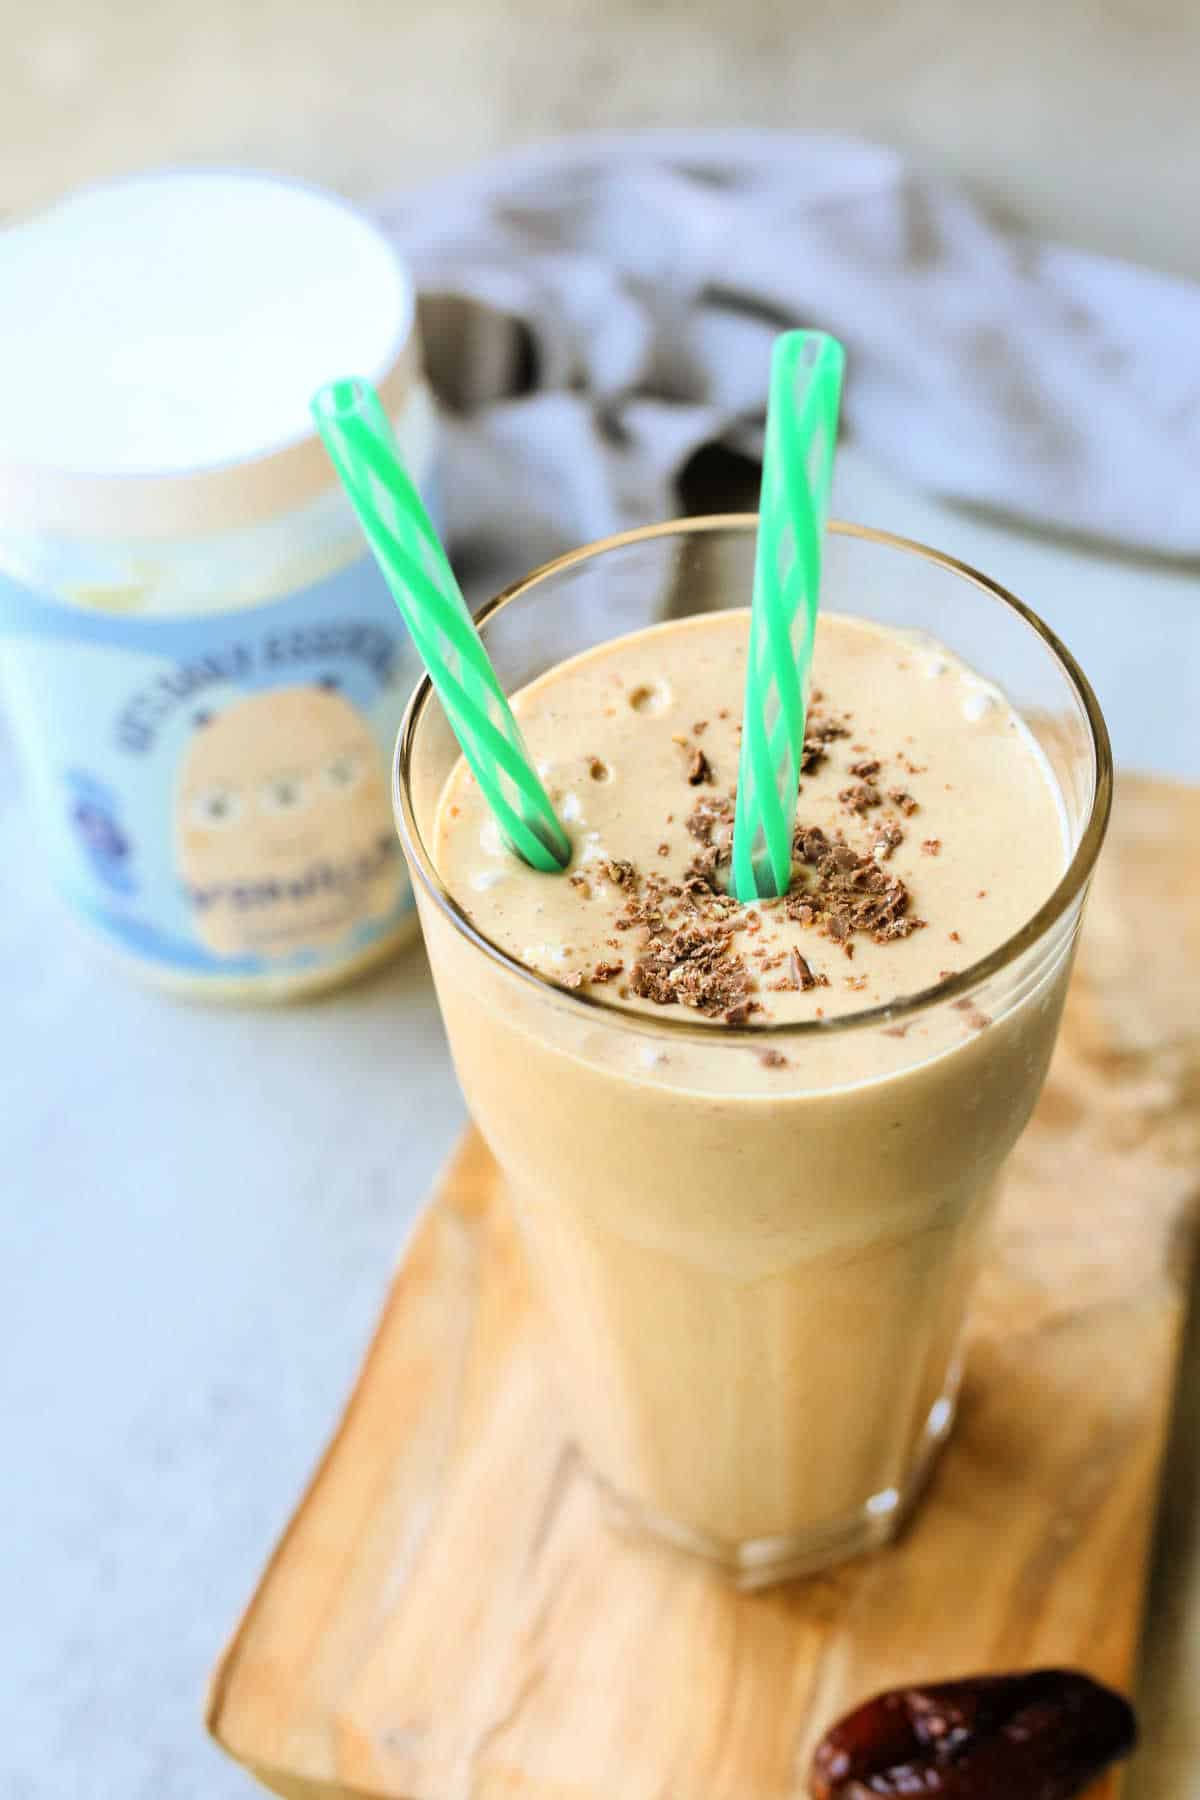 Peanut butter & banana smoothie recipe in a glass.